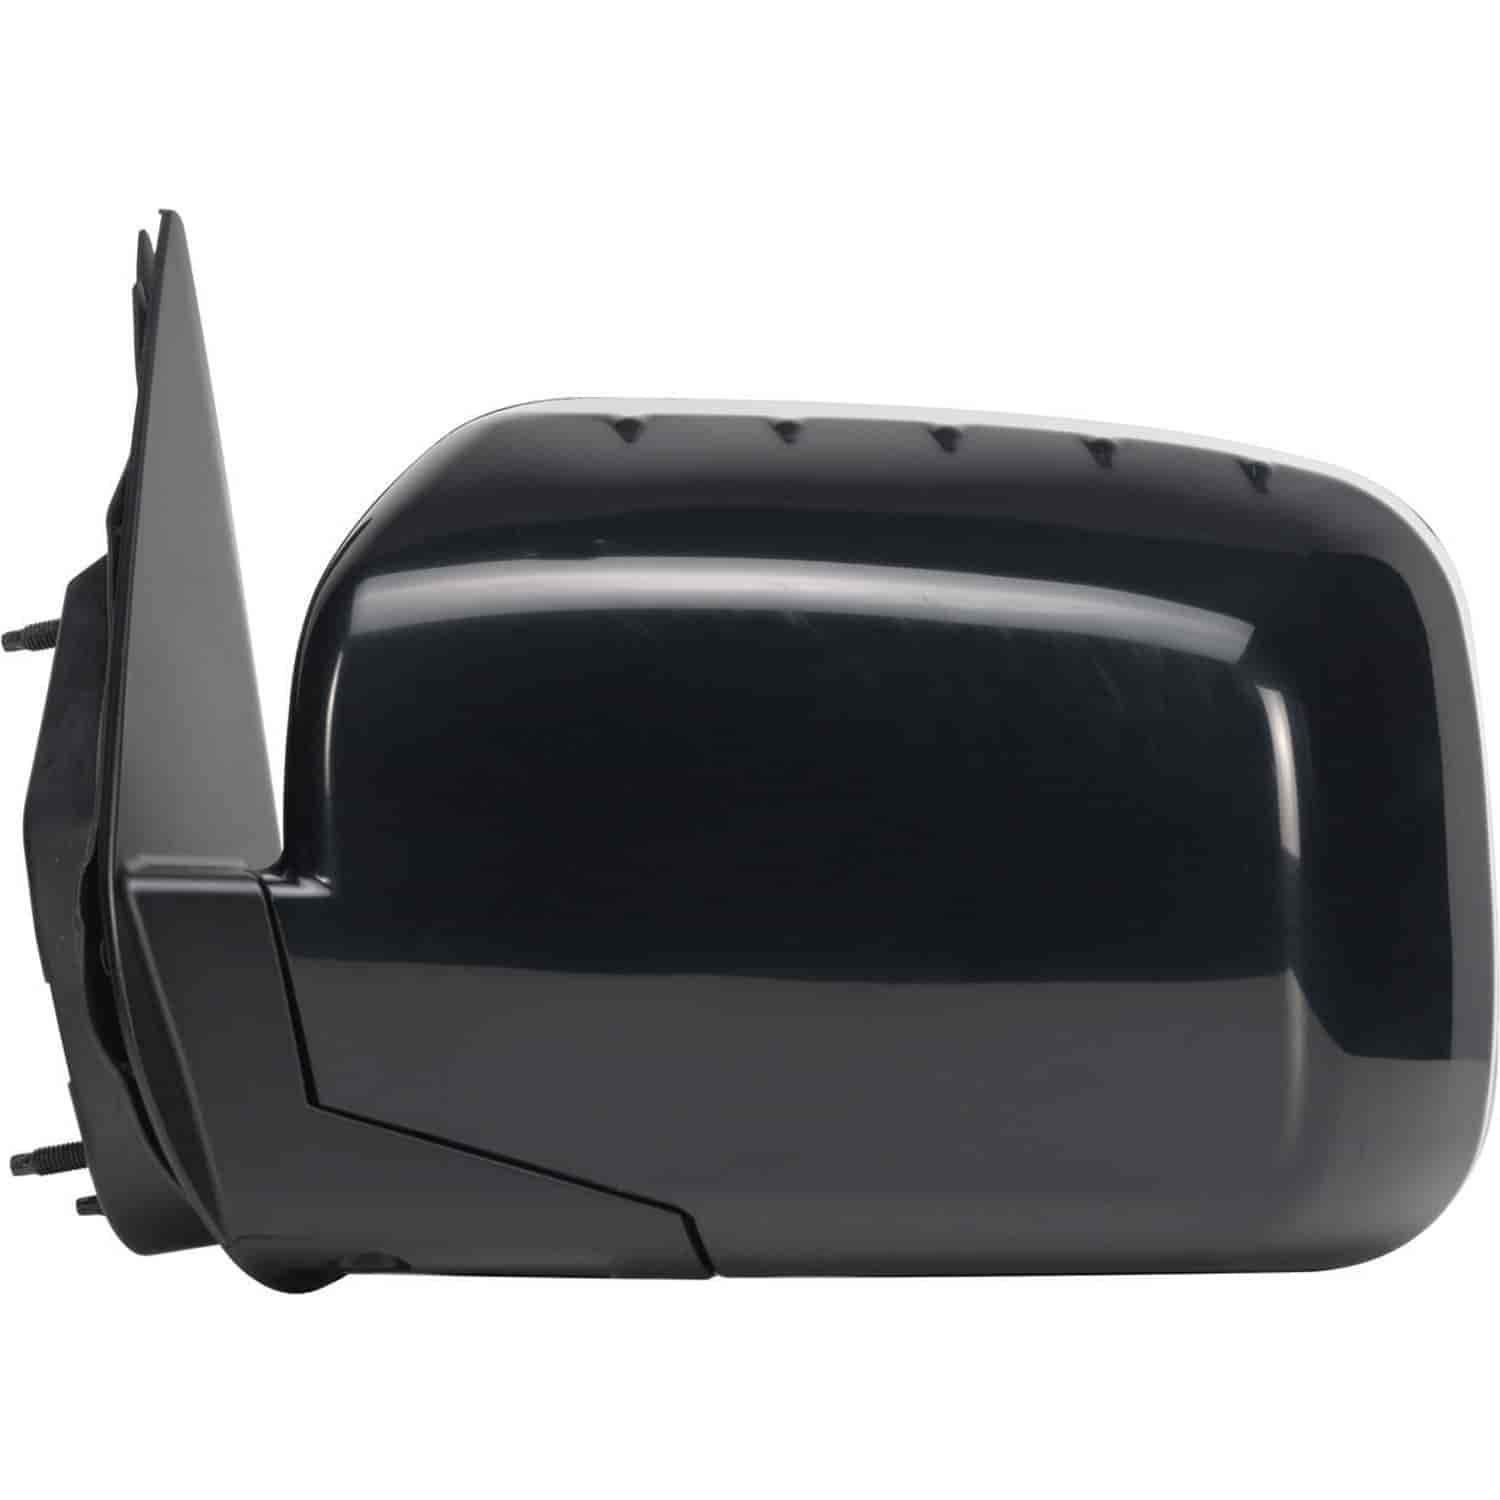 OEM Style Replacement mirror for 41804 Honda Ridgeline driver side mirror tested to fit and function